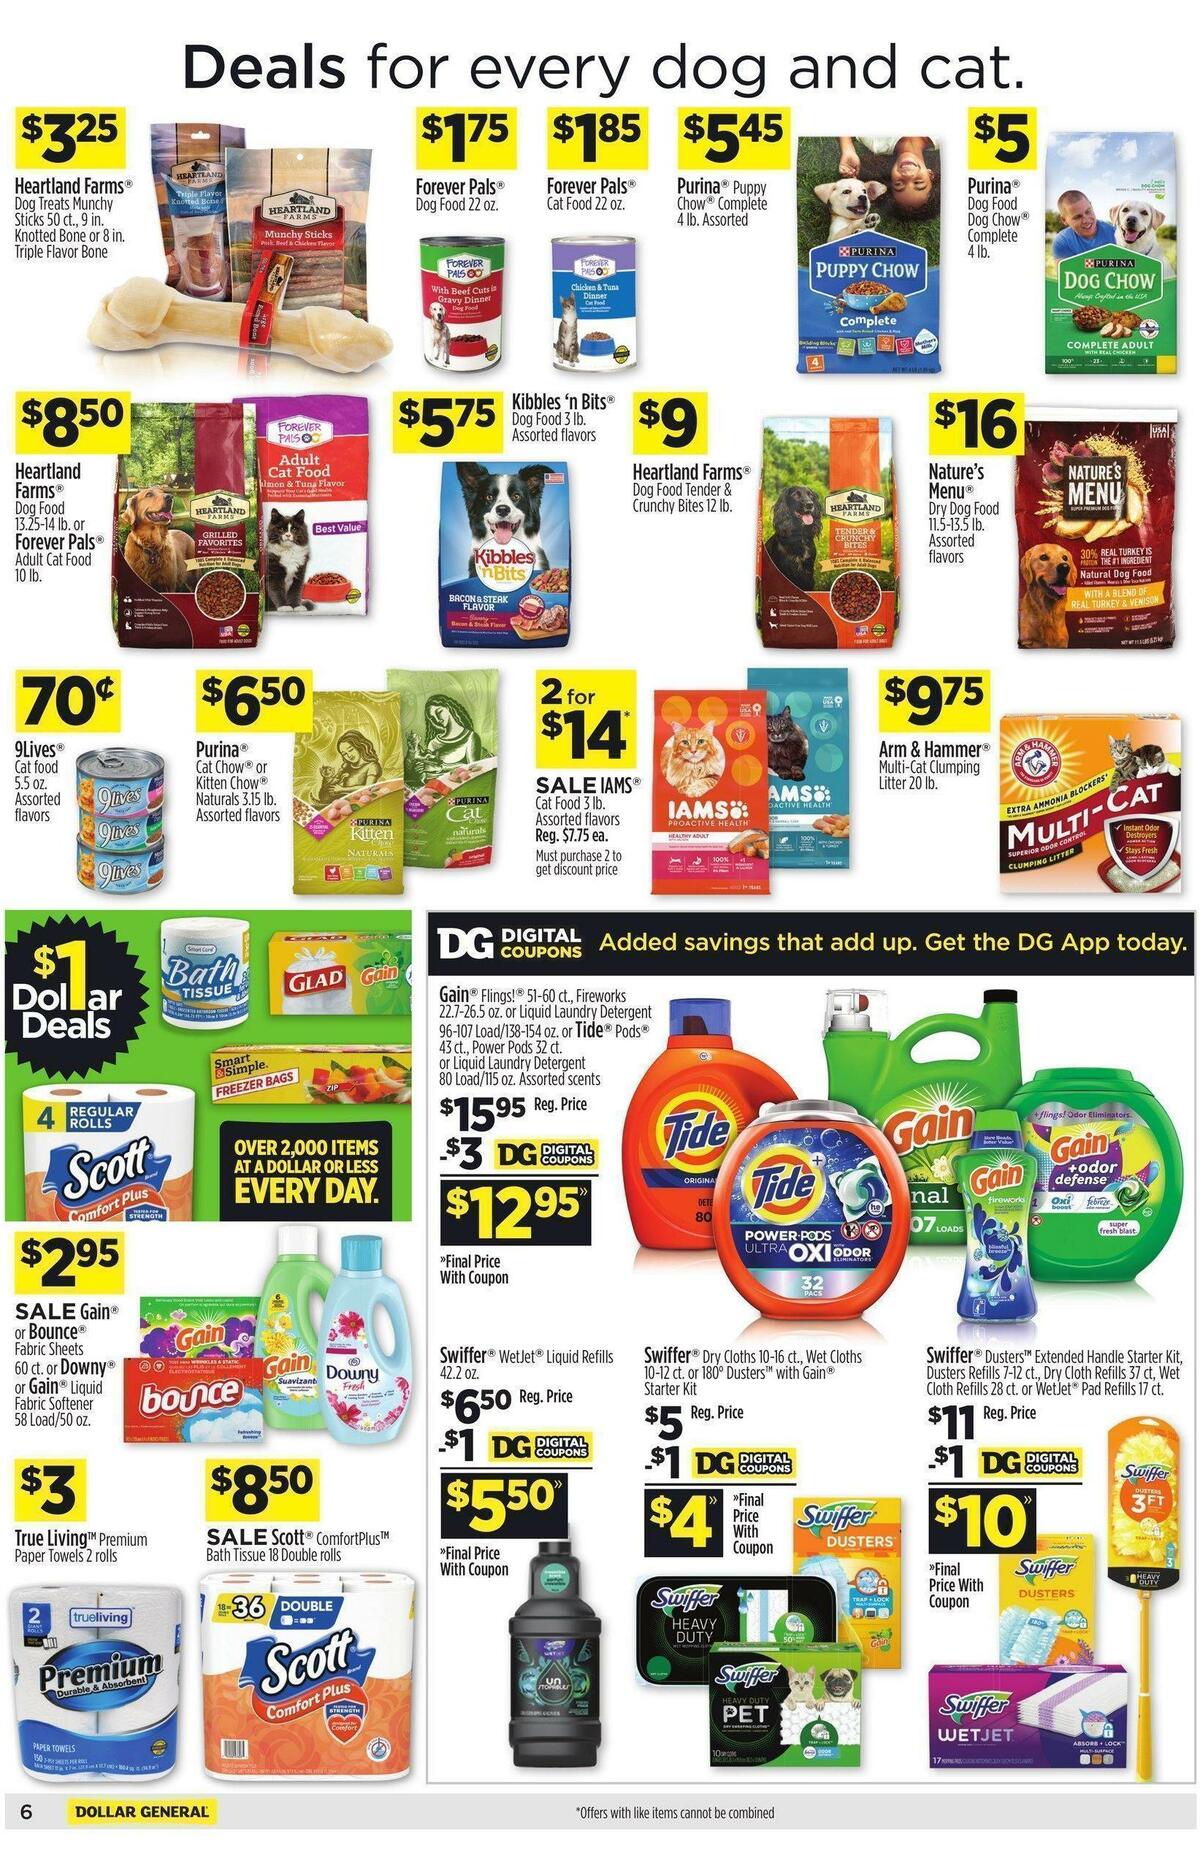 Dollar General Weekly Ad from May 8